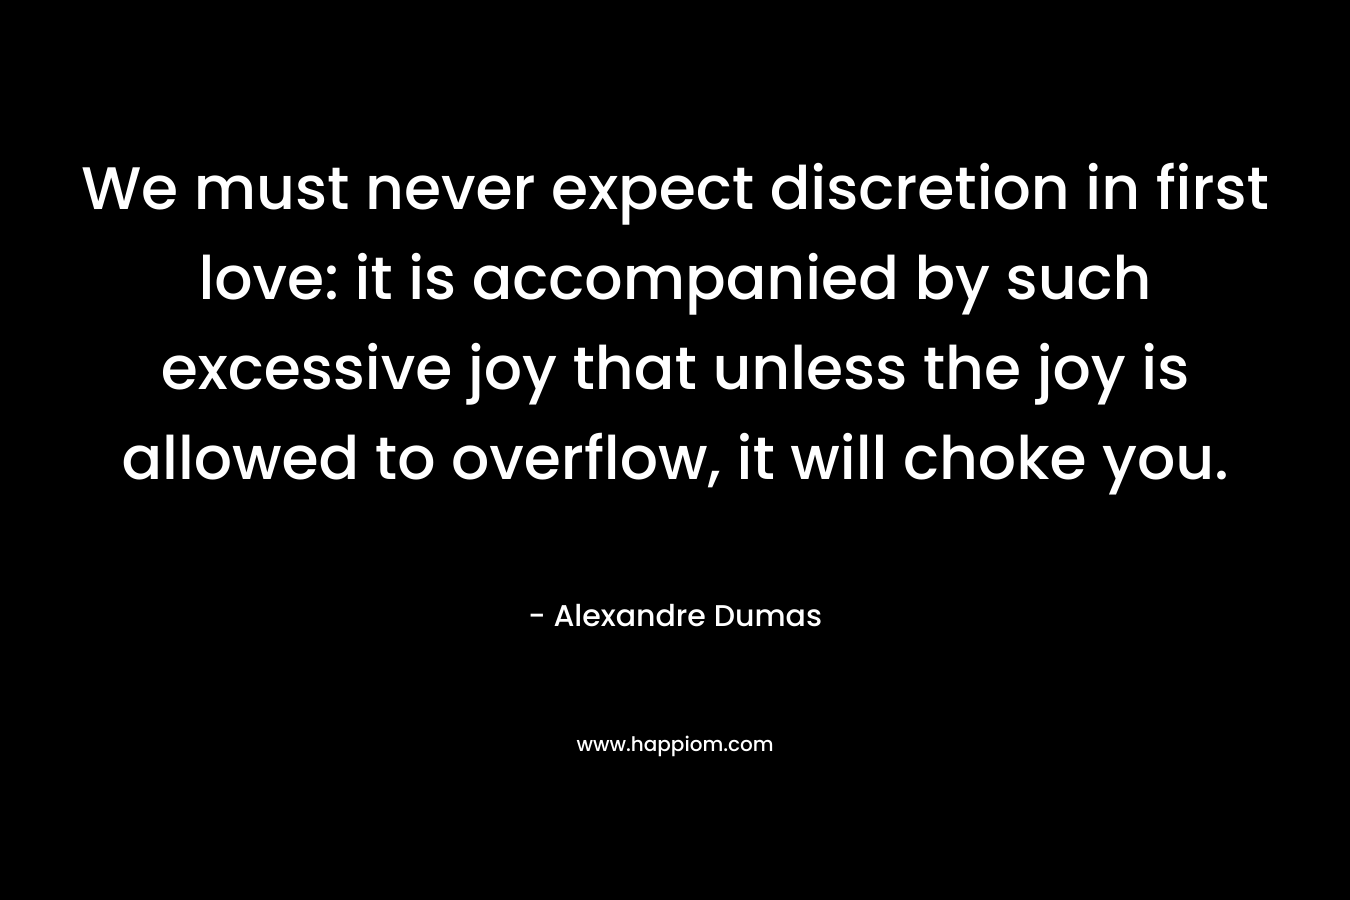 We must never expect discretion in first love: it is accompanied by such excessive joy that unless the joy is allowed to overflow, it will choke you.